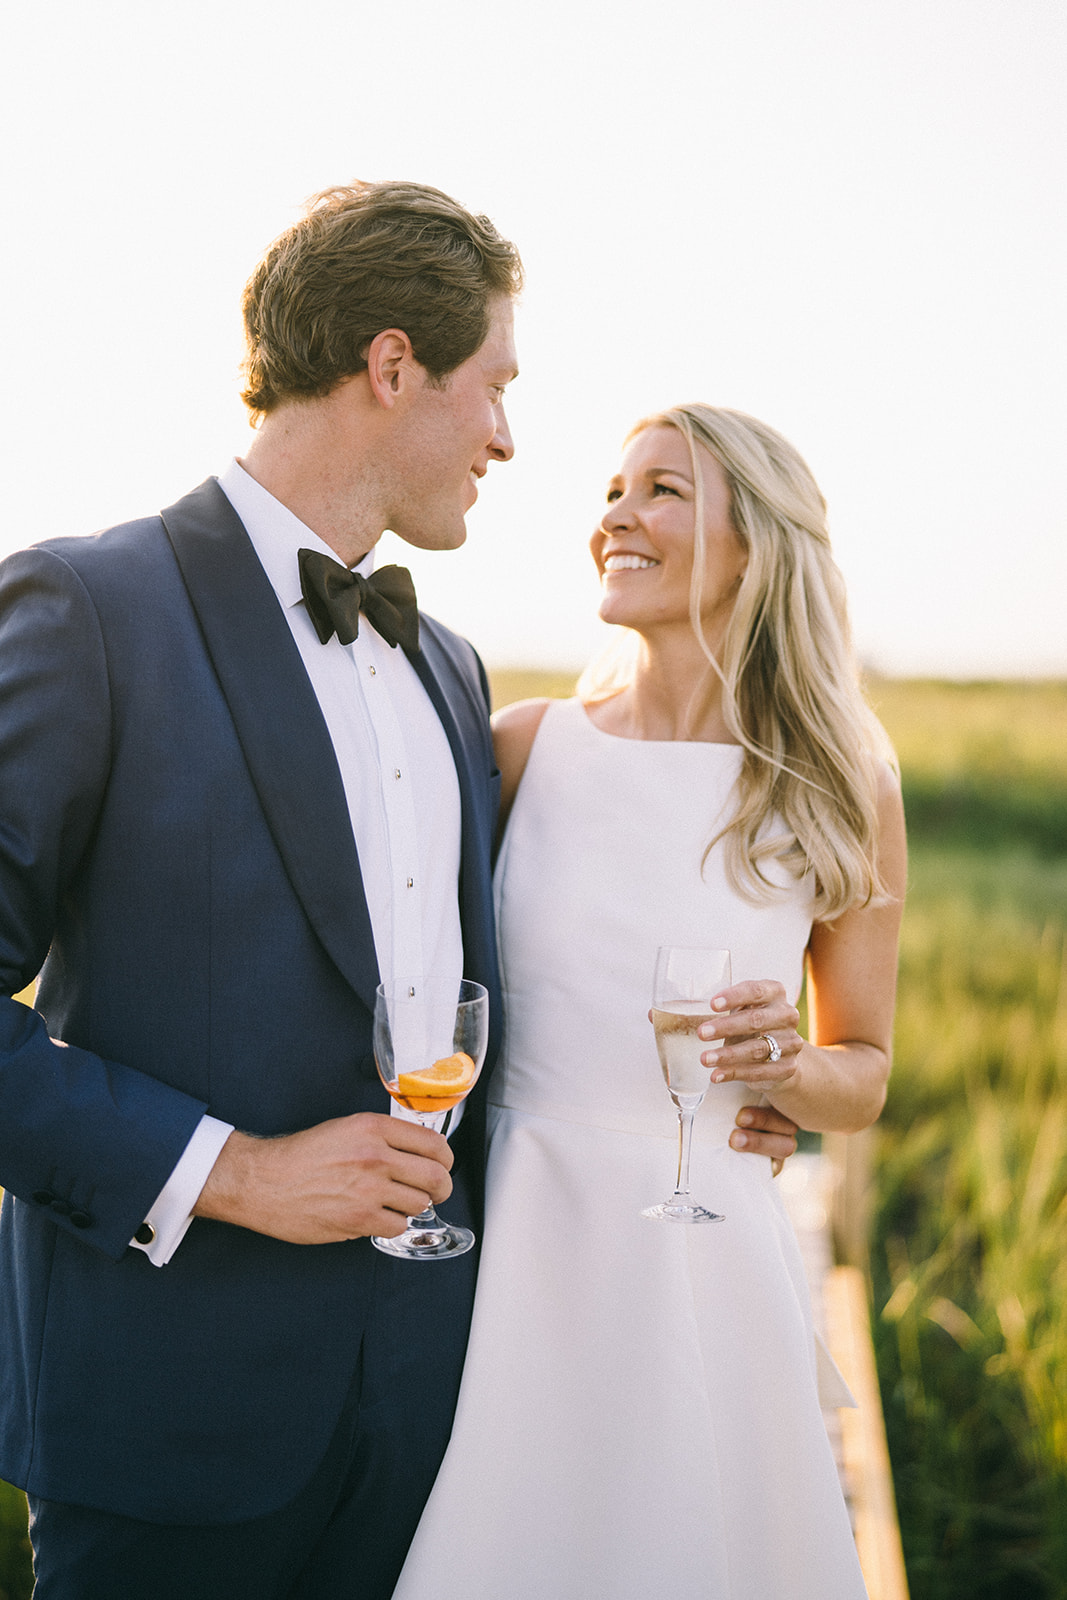 Bride and groom looking at each other and smiling while holding cocktails 